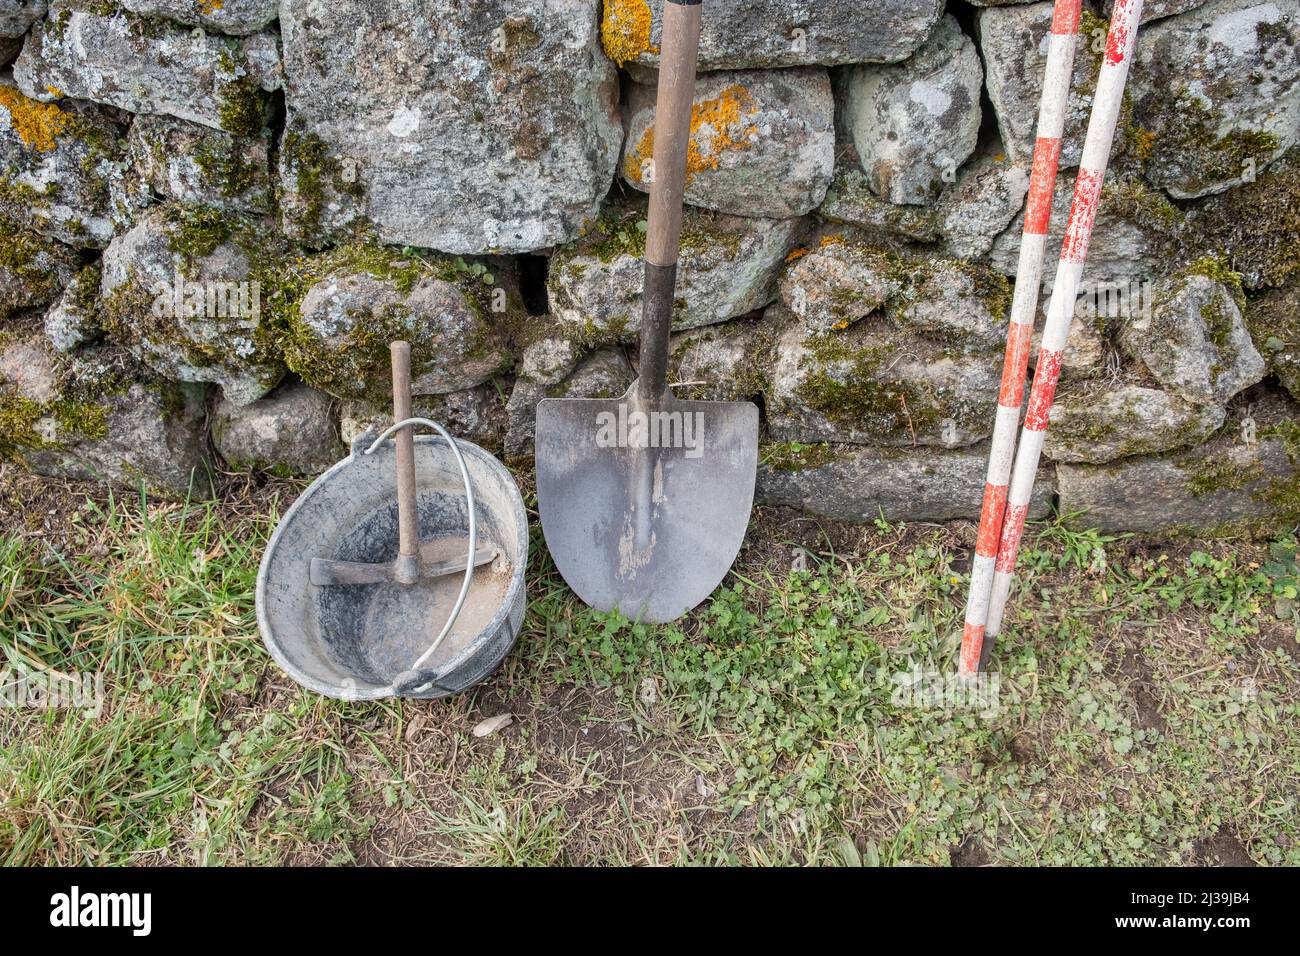 tools leaning against a wall in an archaeological excavation Archaeology works Stock Photo